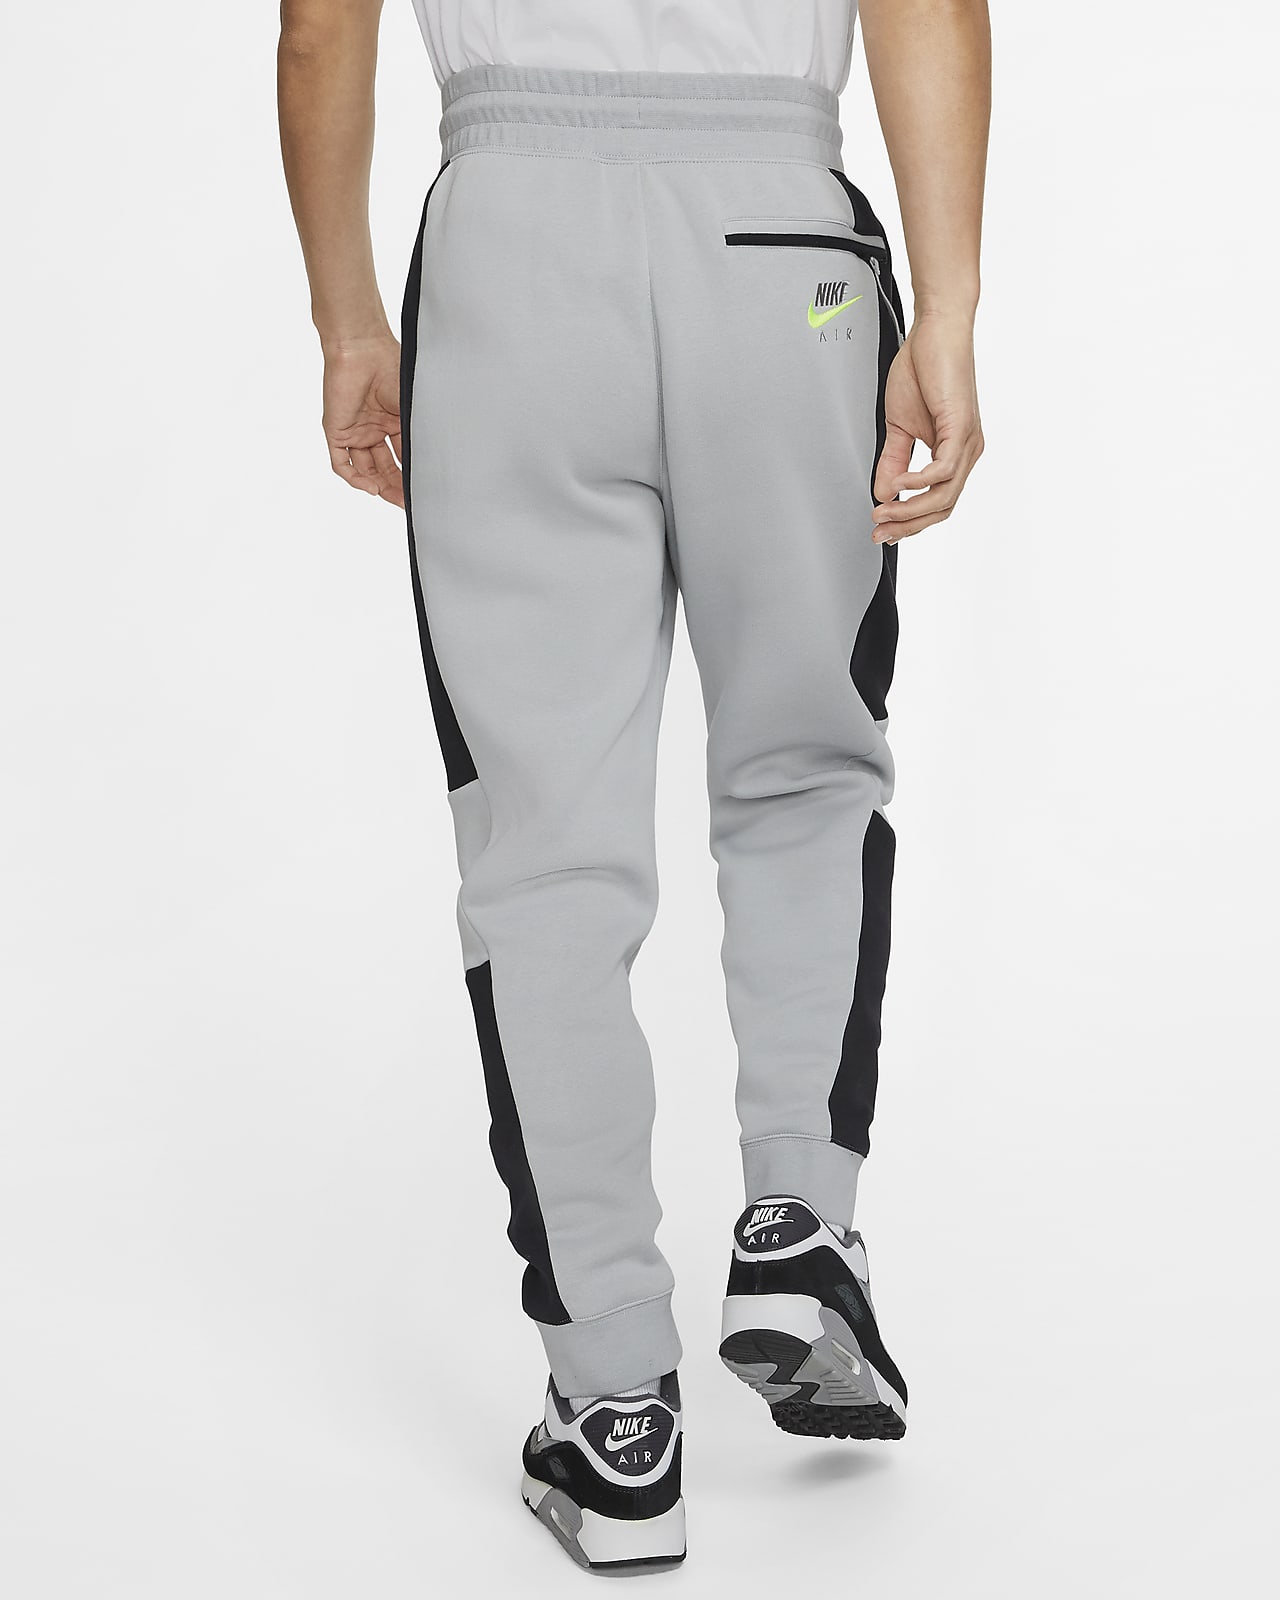 nike reflective outfit